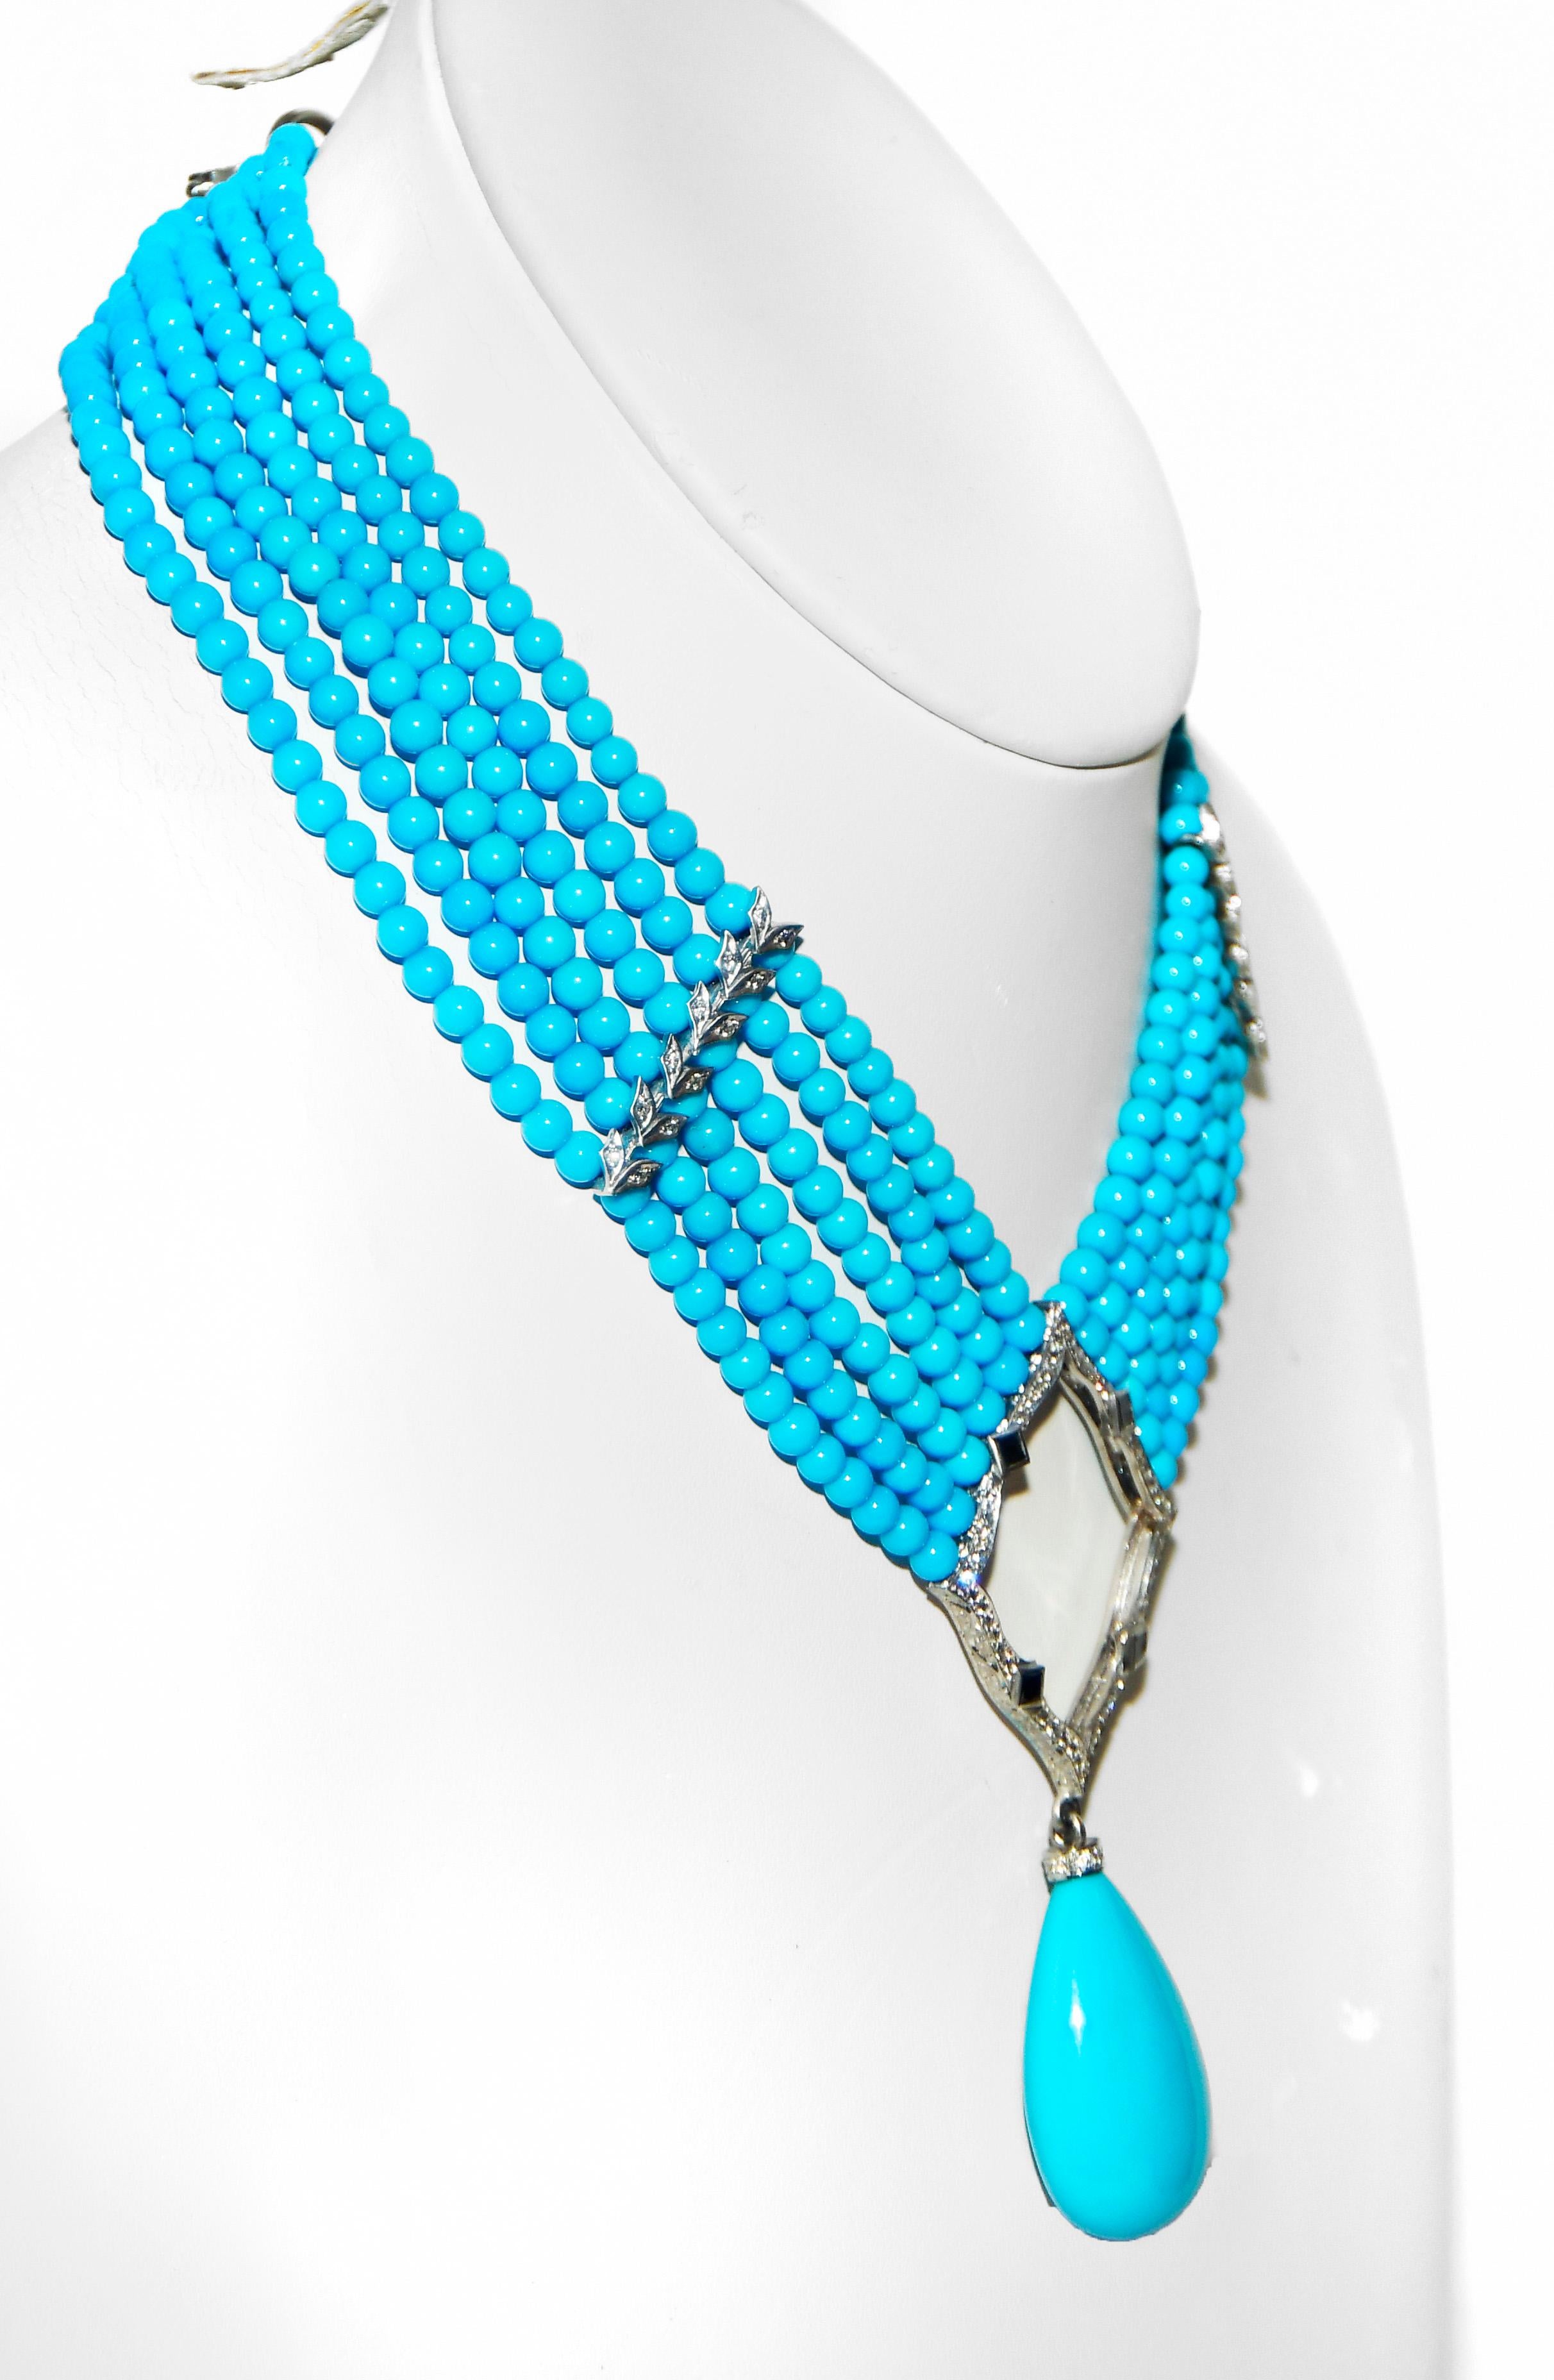 An extraordinary and rare example of Loree Rodkin's fine jewelry.  Six strands of beautifully matched round Sleeping Beauty turquoise beads is just the beginning!  Beads measure 4mm-5mm.  Strands are held together with two 18 karat white gold